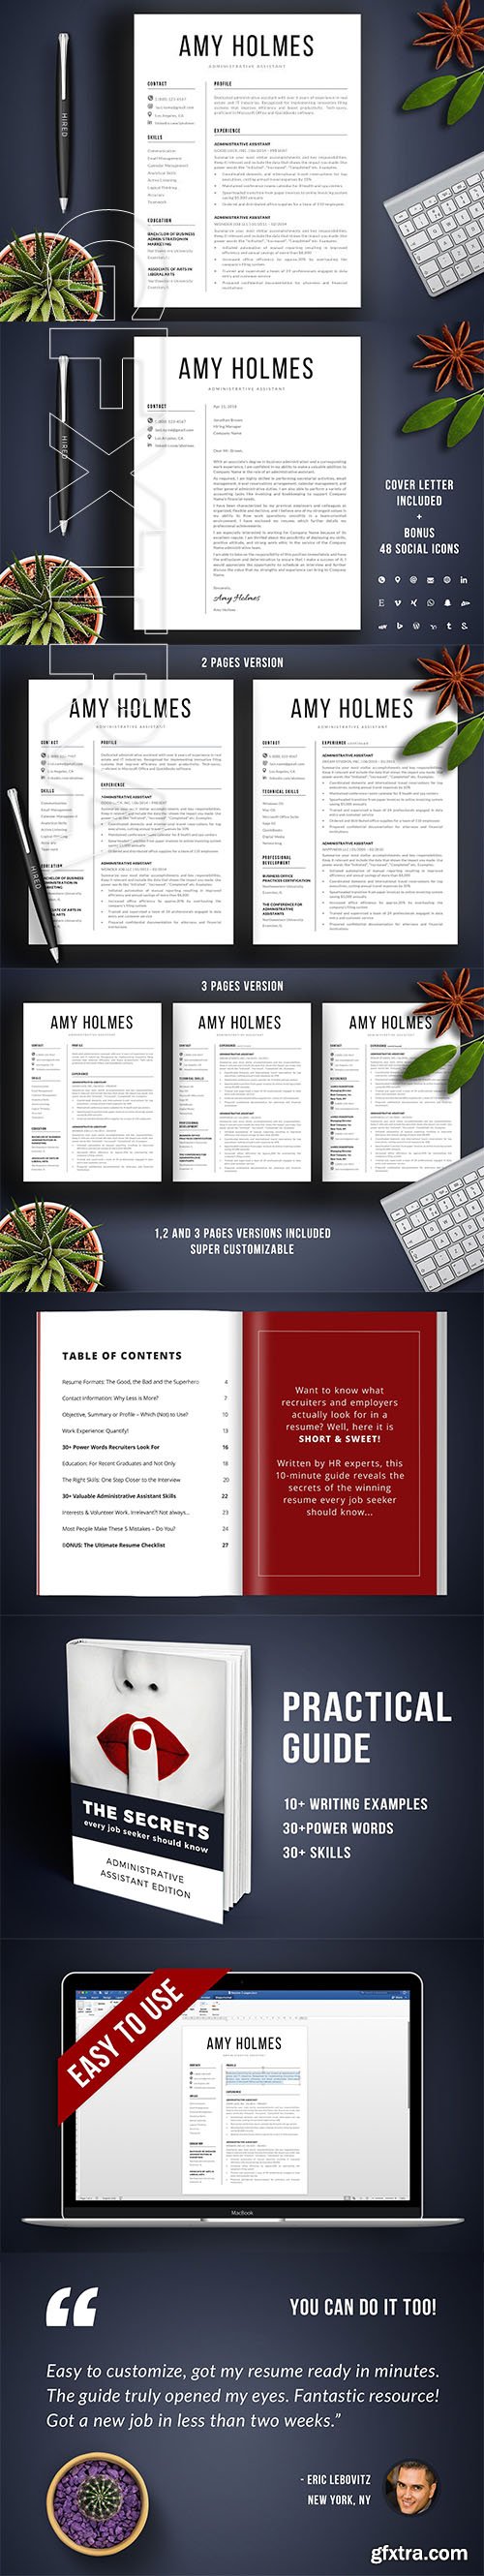 CreativeMarket - Resume CV - 1, 2 and 3 Pages 2475678